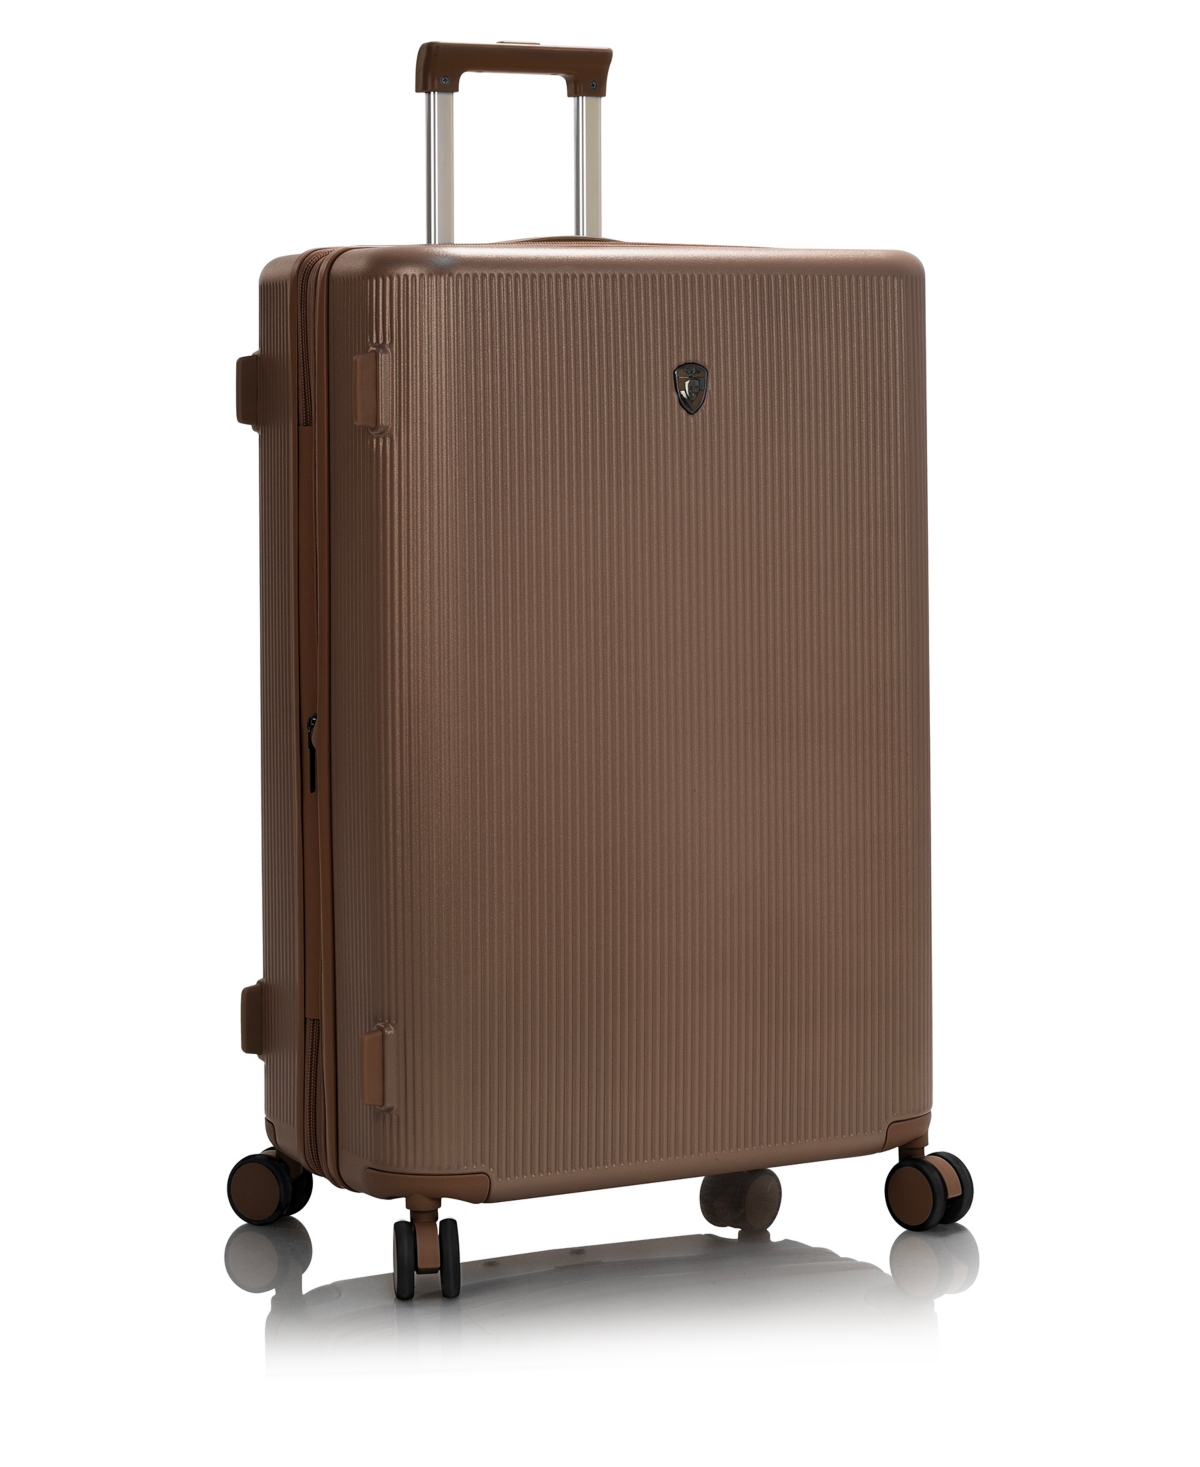 Hey's Earth Tones 30" Check-In Spinner luggage - Umber